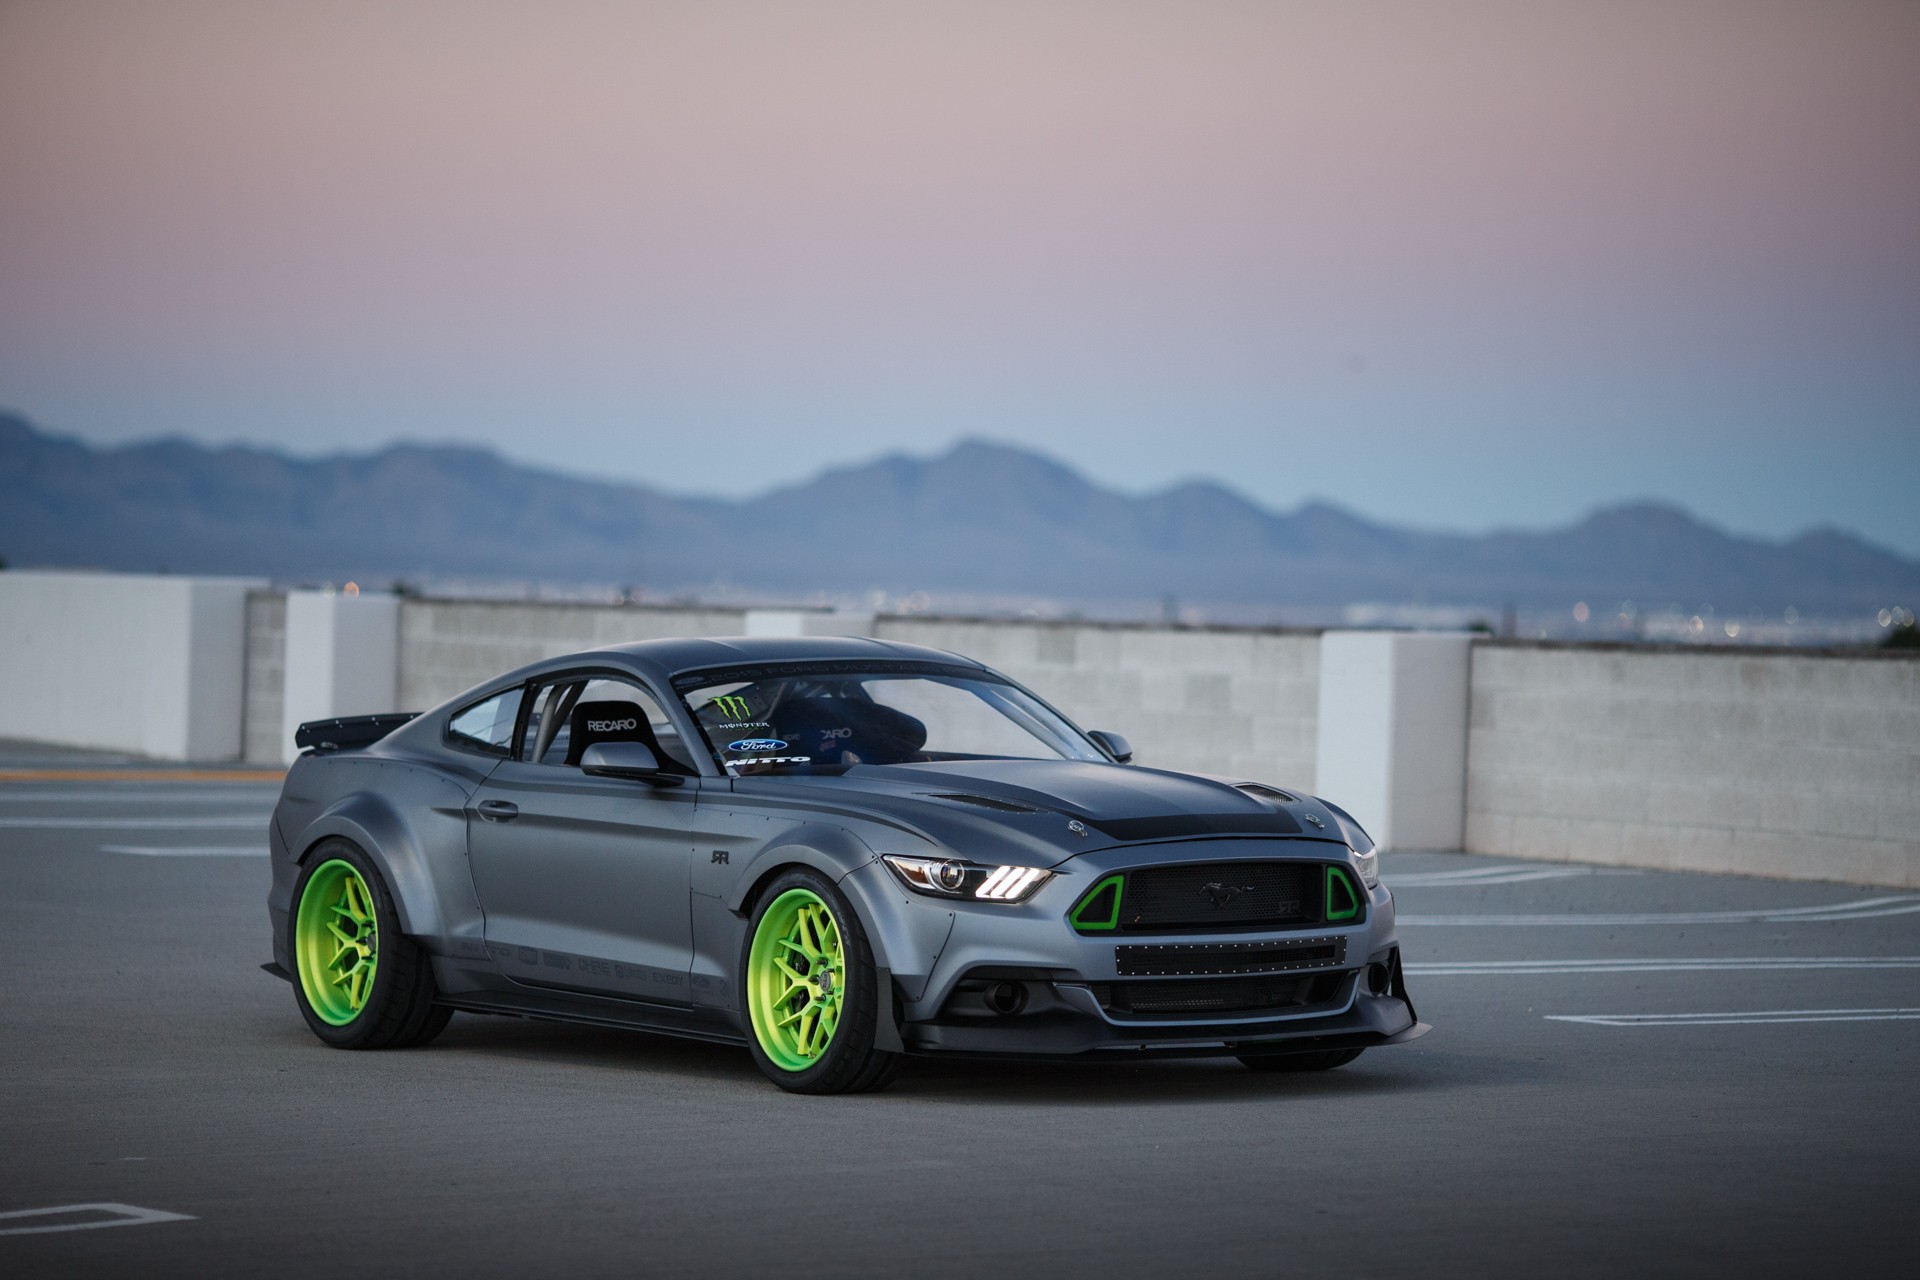 General 1920x1280 Ford Ford Mustang Ford Mustang RTR Vaughn Gittin Jr car vehicle Monster Energy silver cars 2015 (Year) American cars Ford Mustang S550 muscle cars